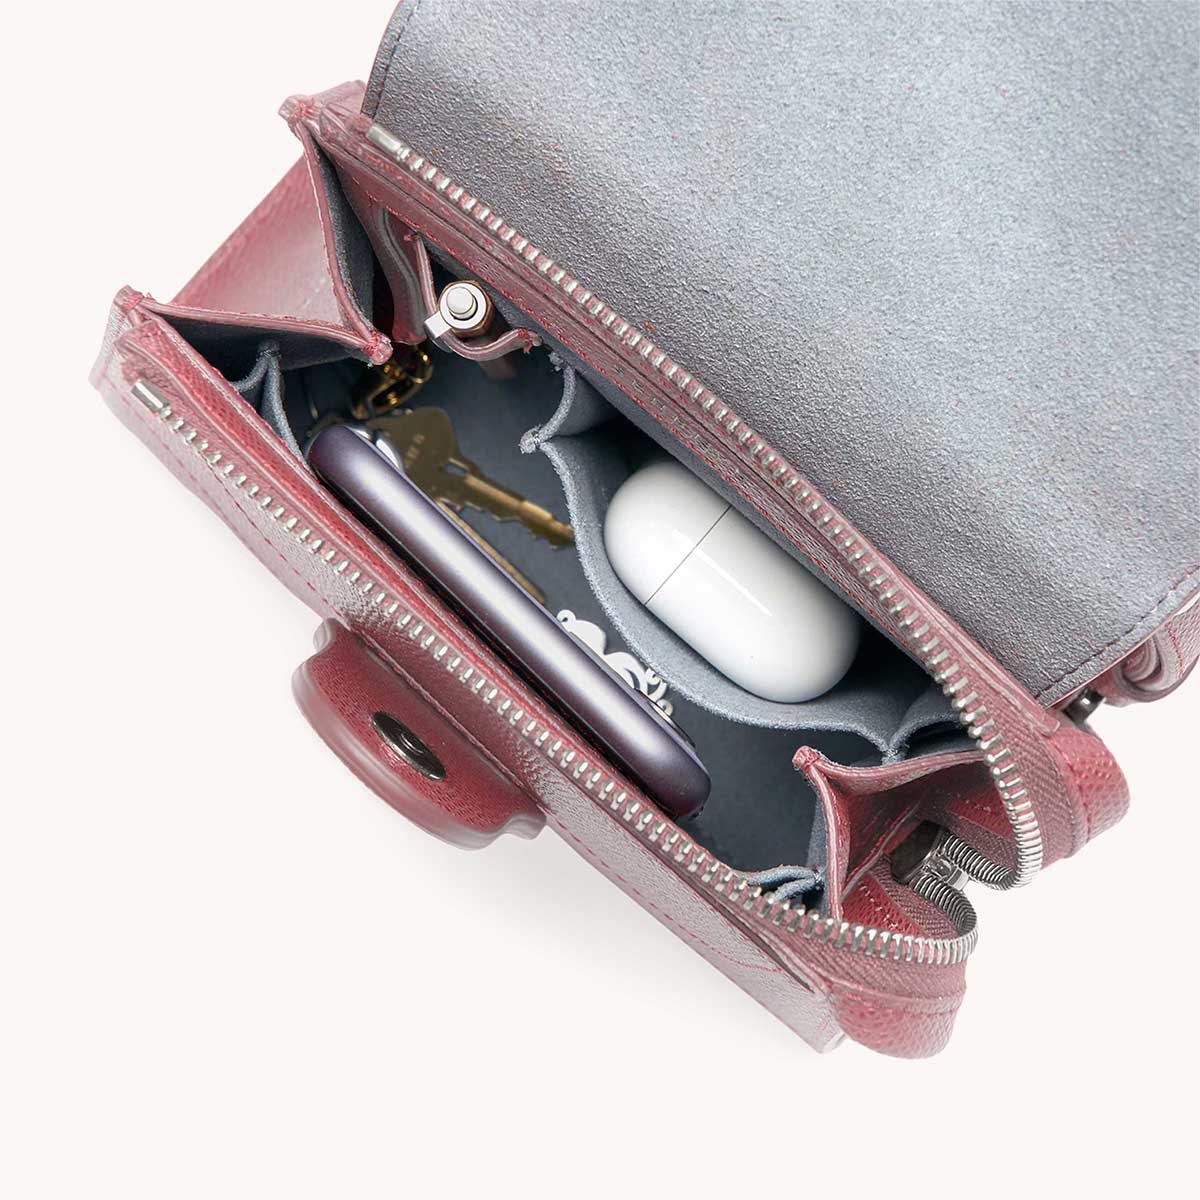 Mini Alunna Bag Pebbled Mauve with Silver Hardware Interior View with What Fits: phone, AirPods, keys